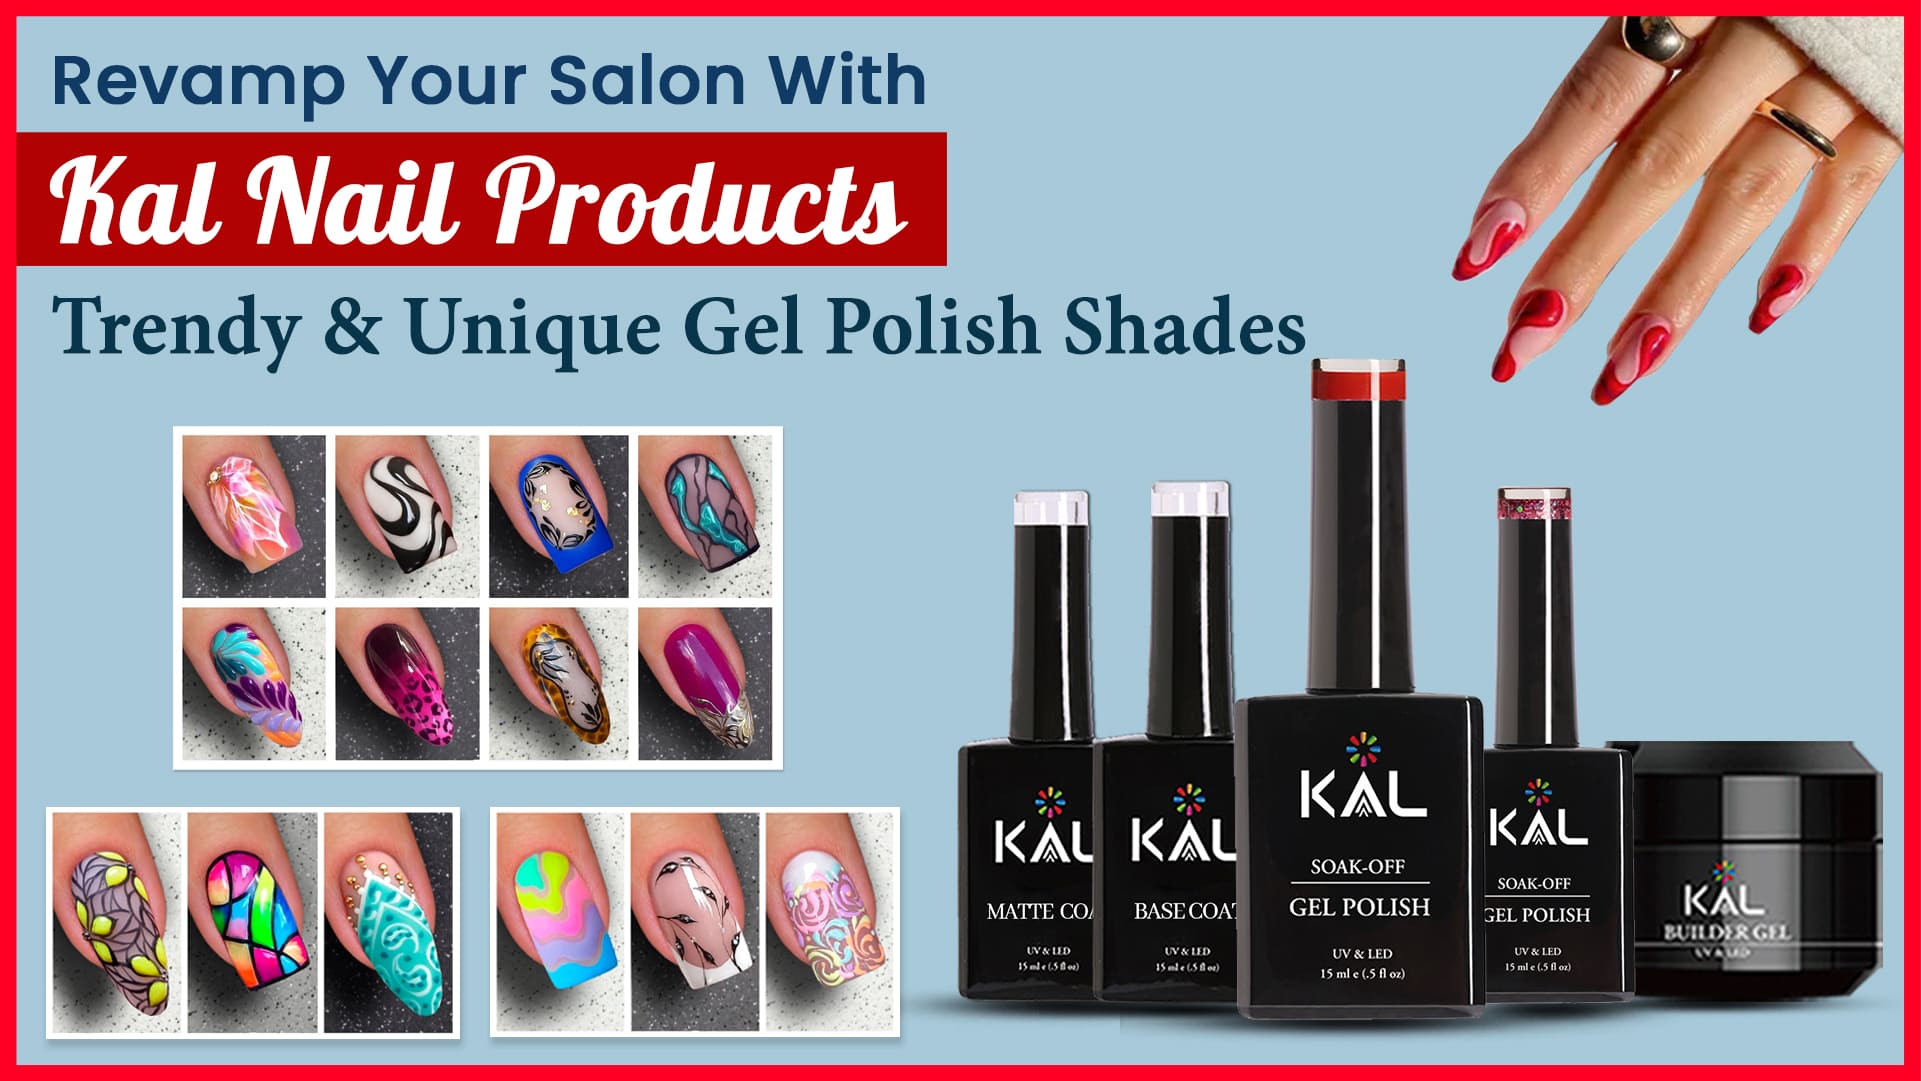 Revamp your salon with Kal Nail Products - Trendy and Unique Gel Polish shades